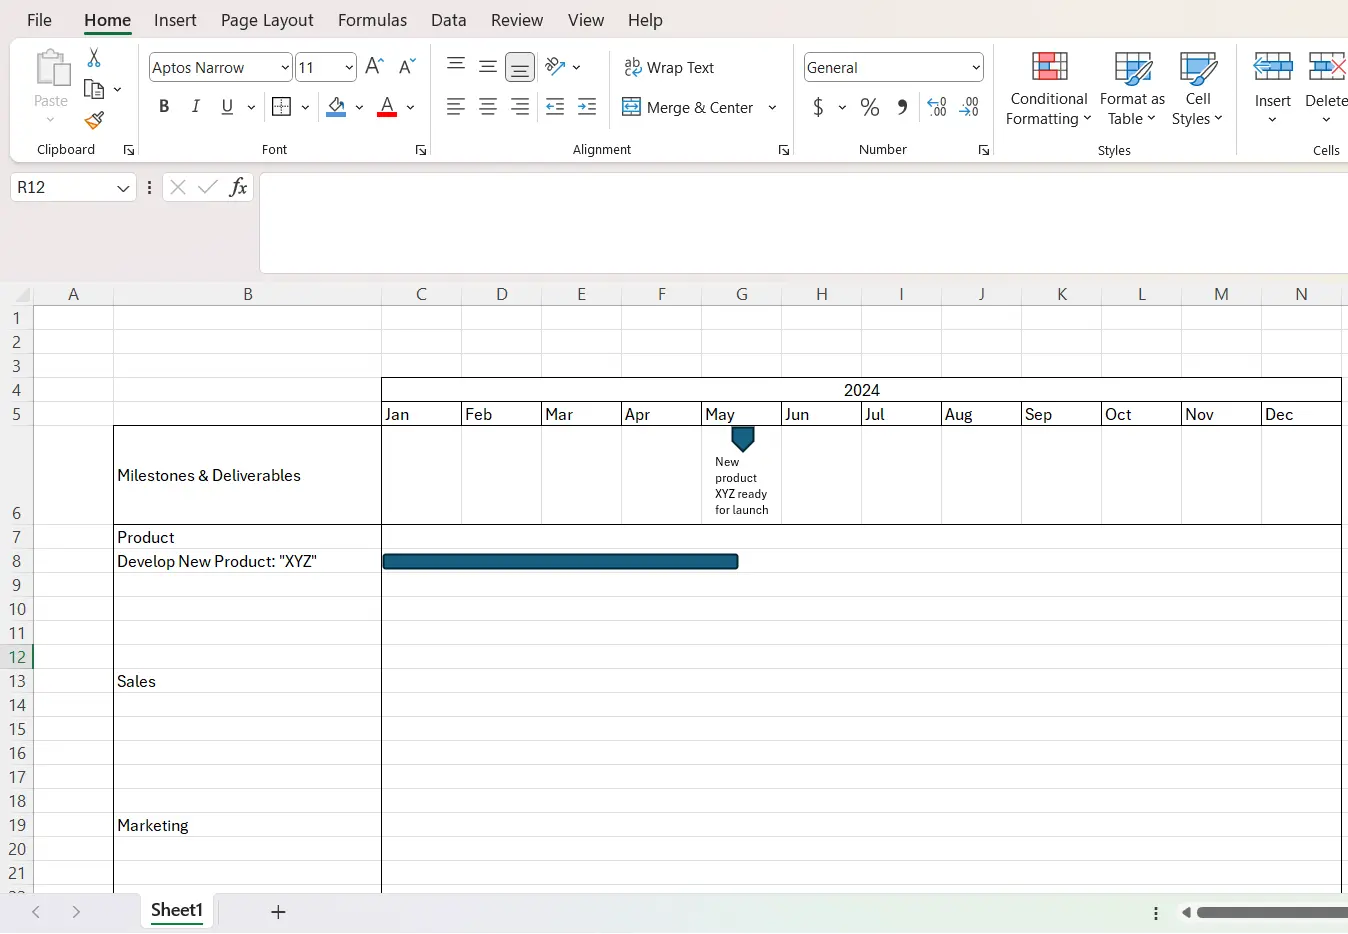 Excel timeline template has been created successfully